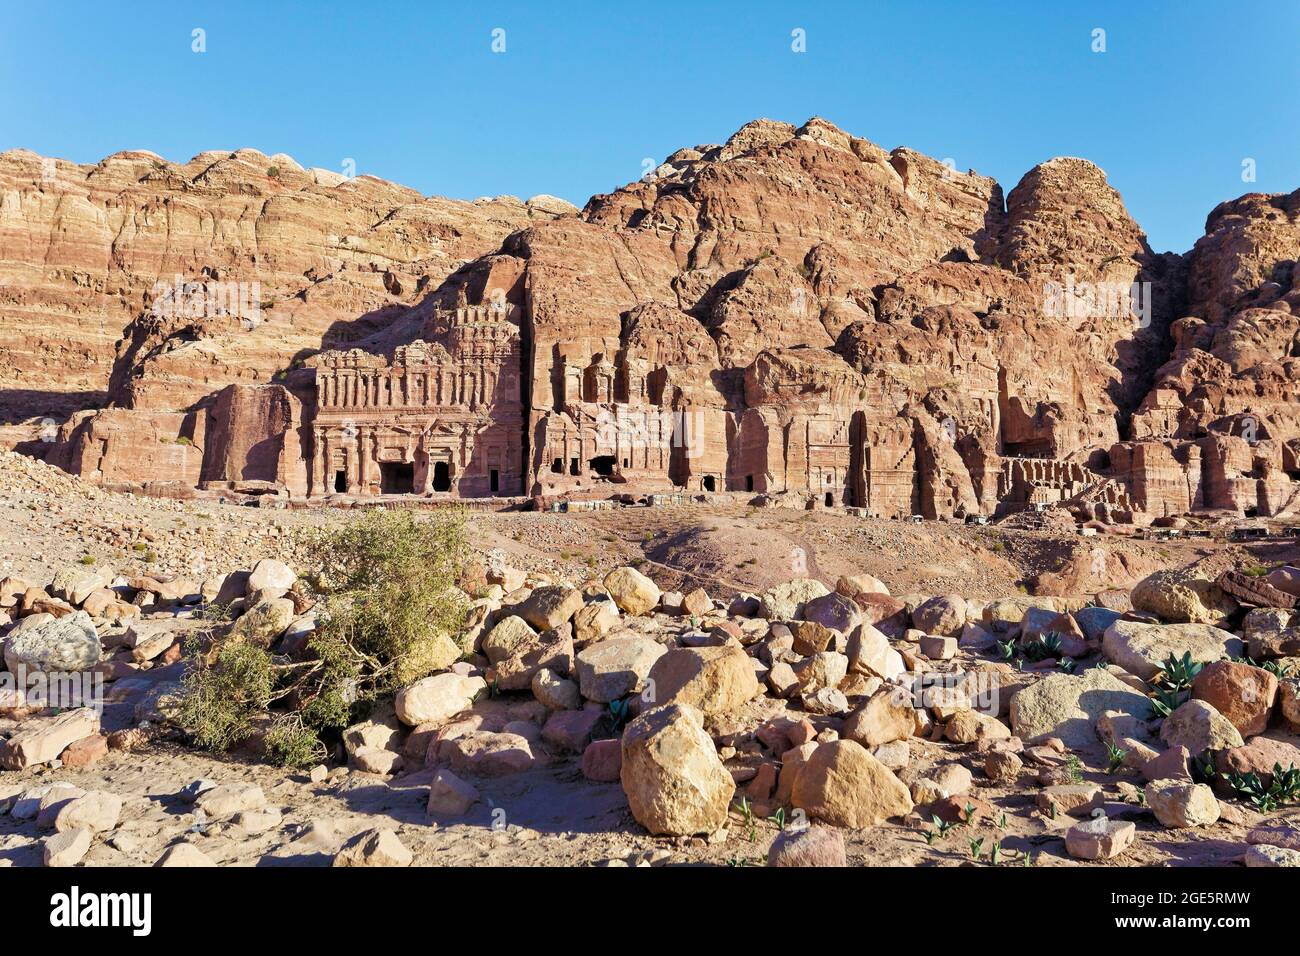 Royal tombs on the western slope of Jabal al-Khubtha, Petra, ancient capital of the Nabataeans, UNESCO World Heritage Site, Kingdom of Jordan Stock Photo